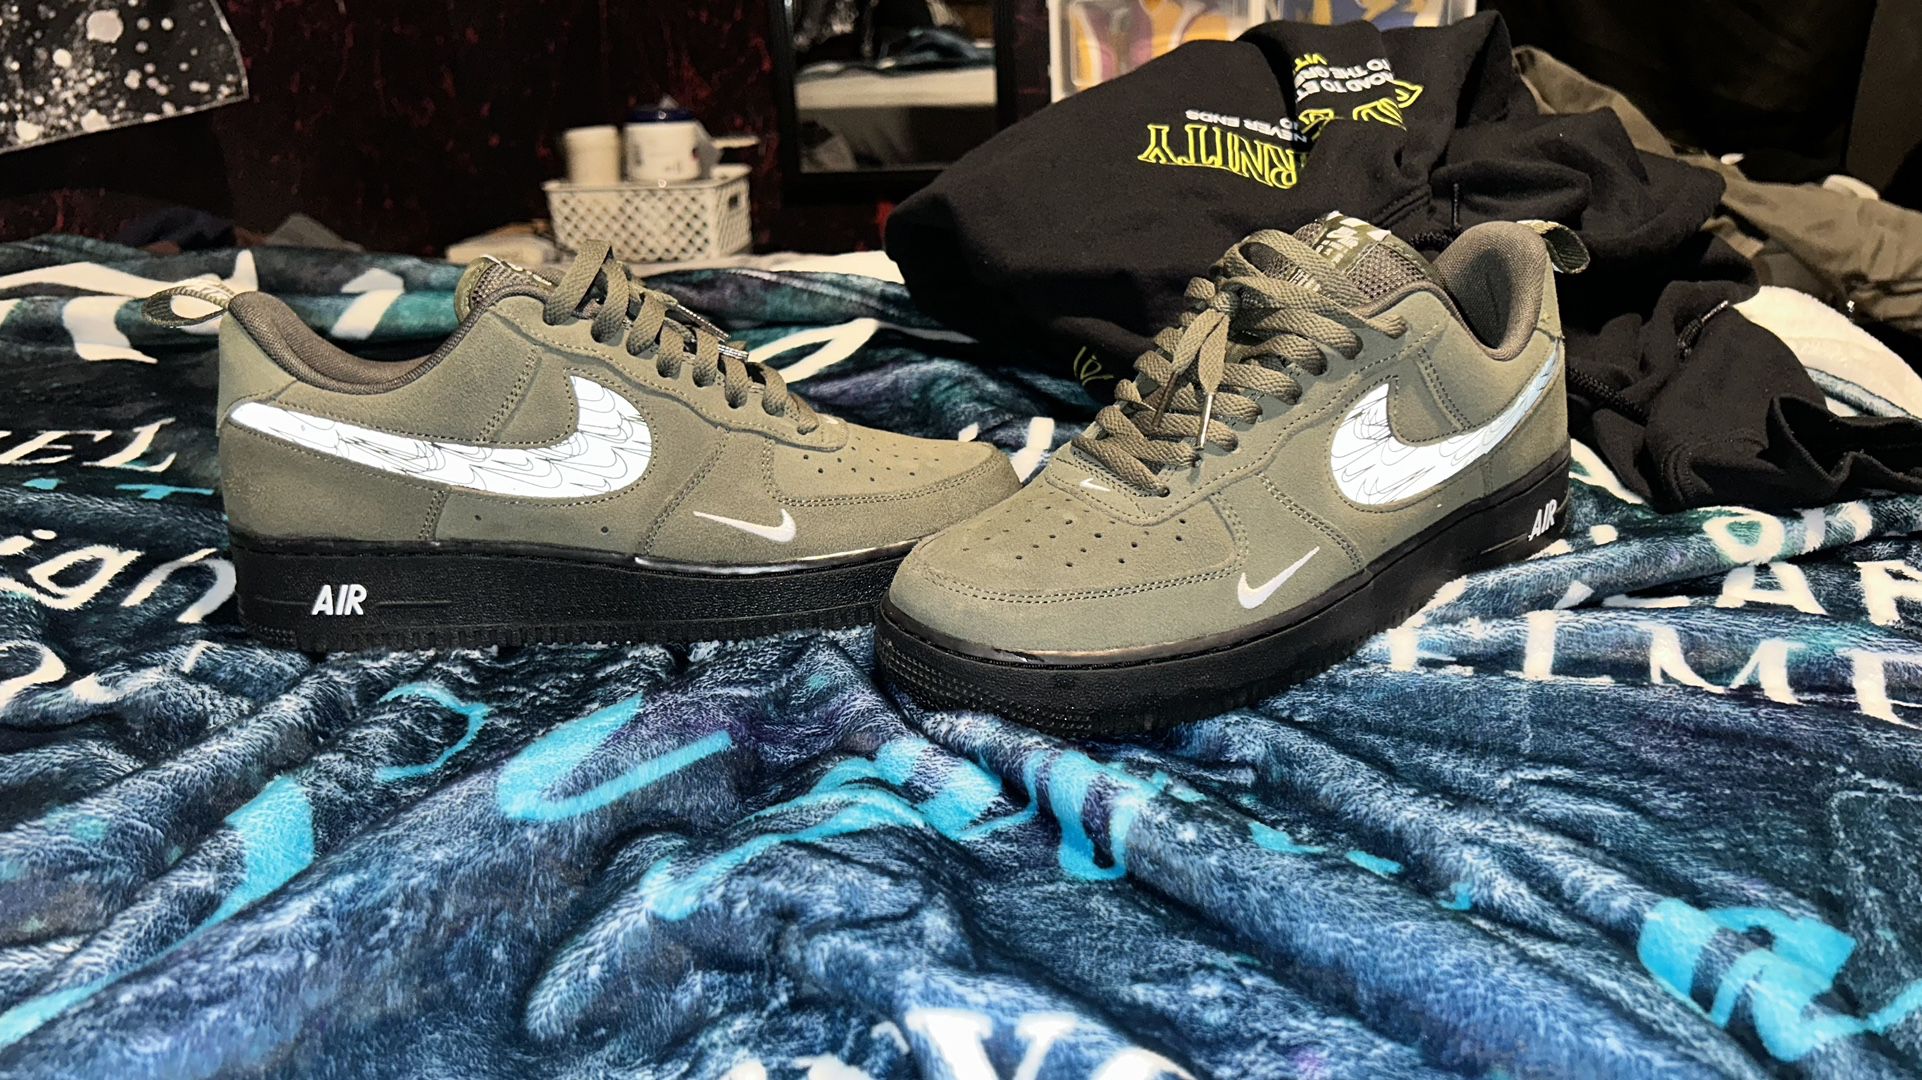 air force 1 '07 LV8' reflective swoosh- cargo khaki size 9 for Sale in  Vincennes, IN - OfferUp